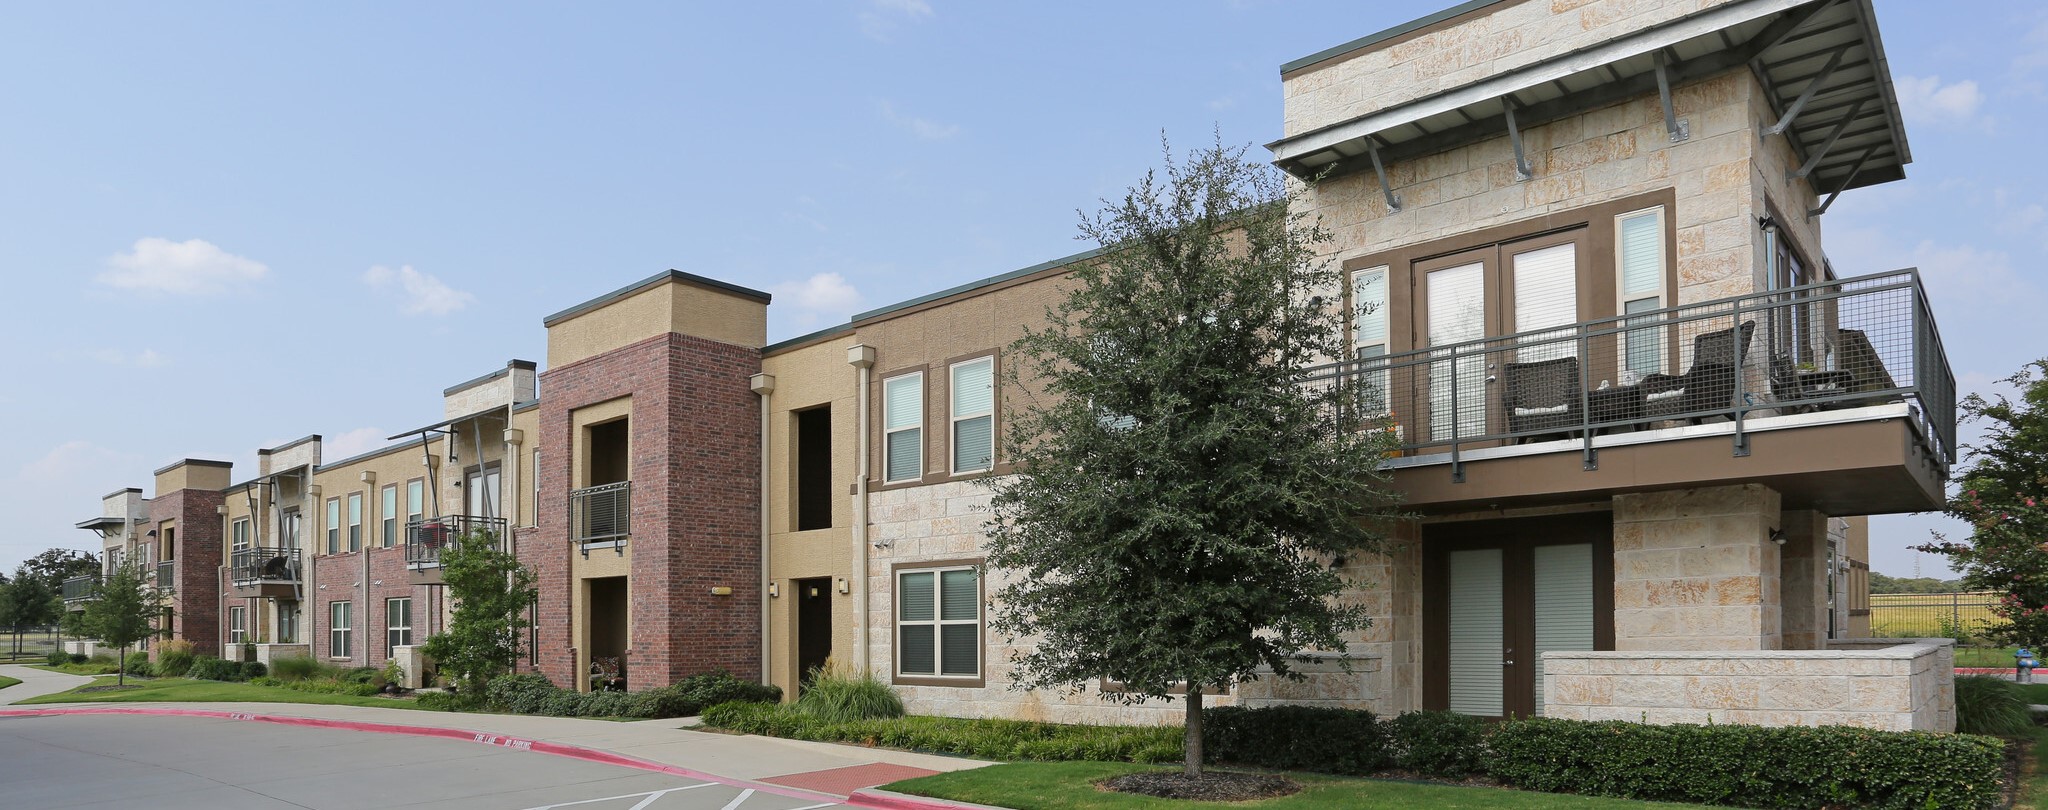 Luxury Apartments for Rent in Corinth, TX